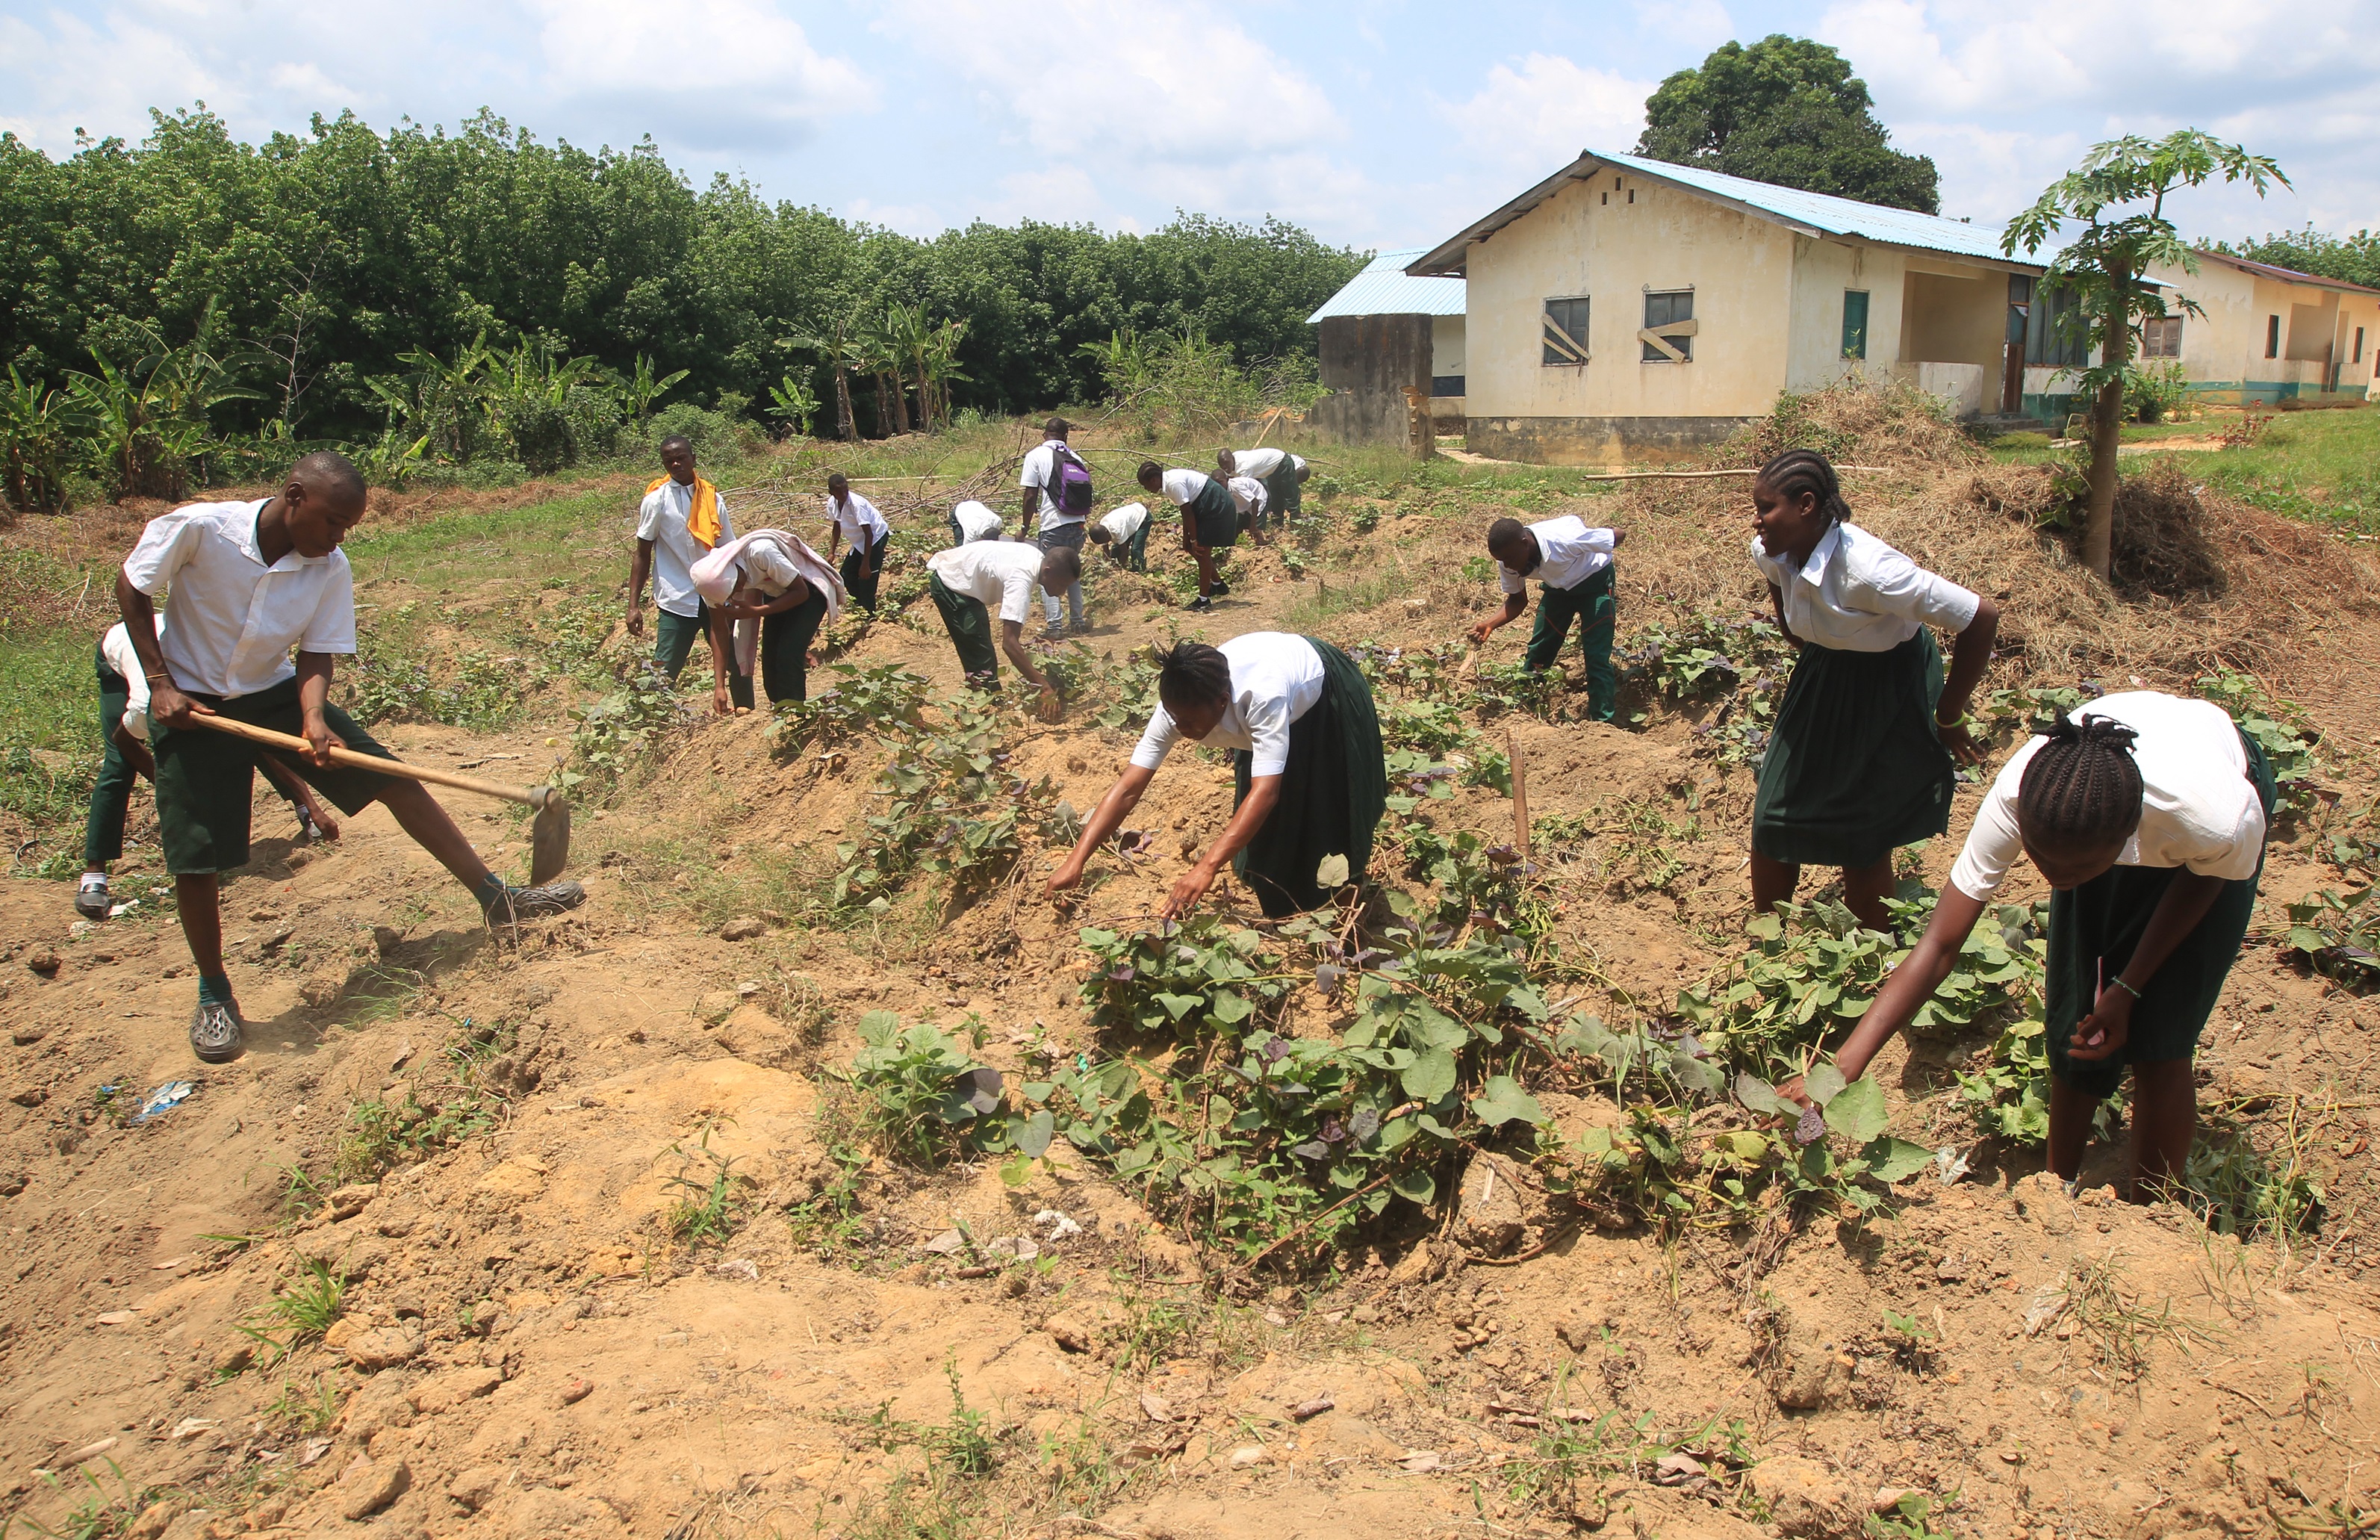 A group of 4-H club members working in a school garden © 4-H Liberia, 2023